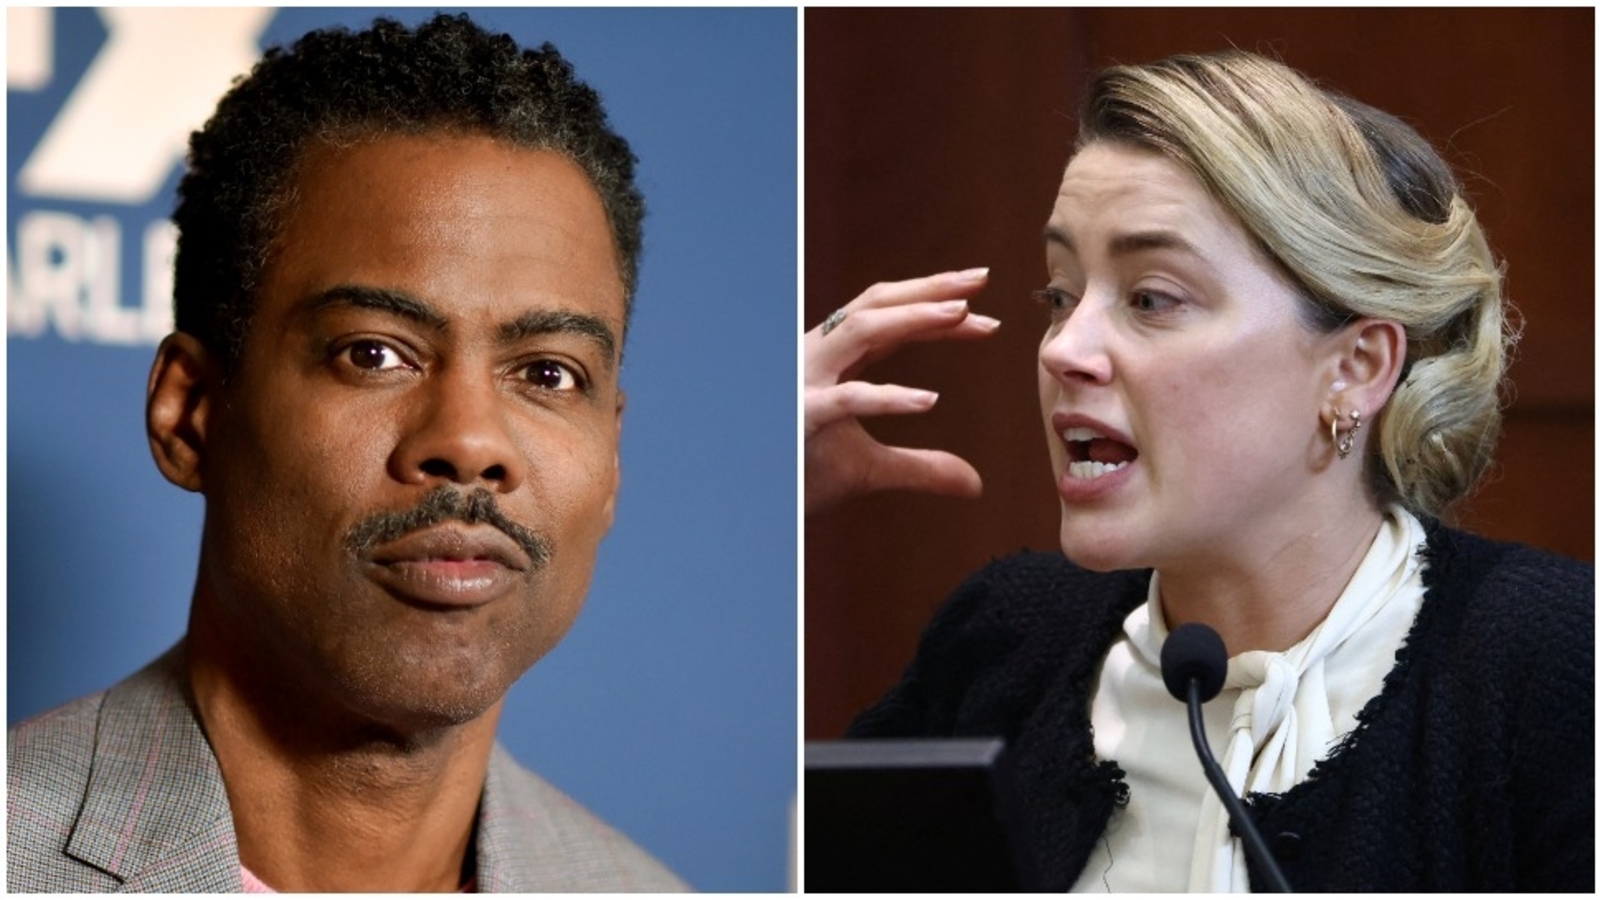 Chris Rock Mocks Amber Heard During London Stand-up, Saying ‘Once You Doo-Doo in Someone’s Bed, You Just Guilty of Everything’